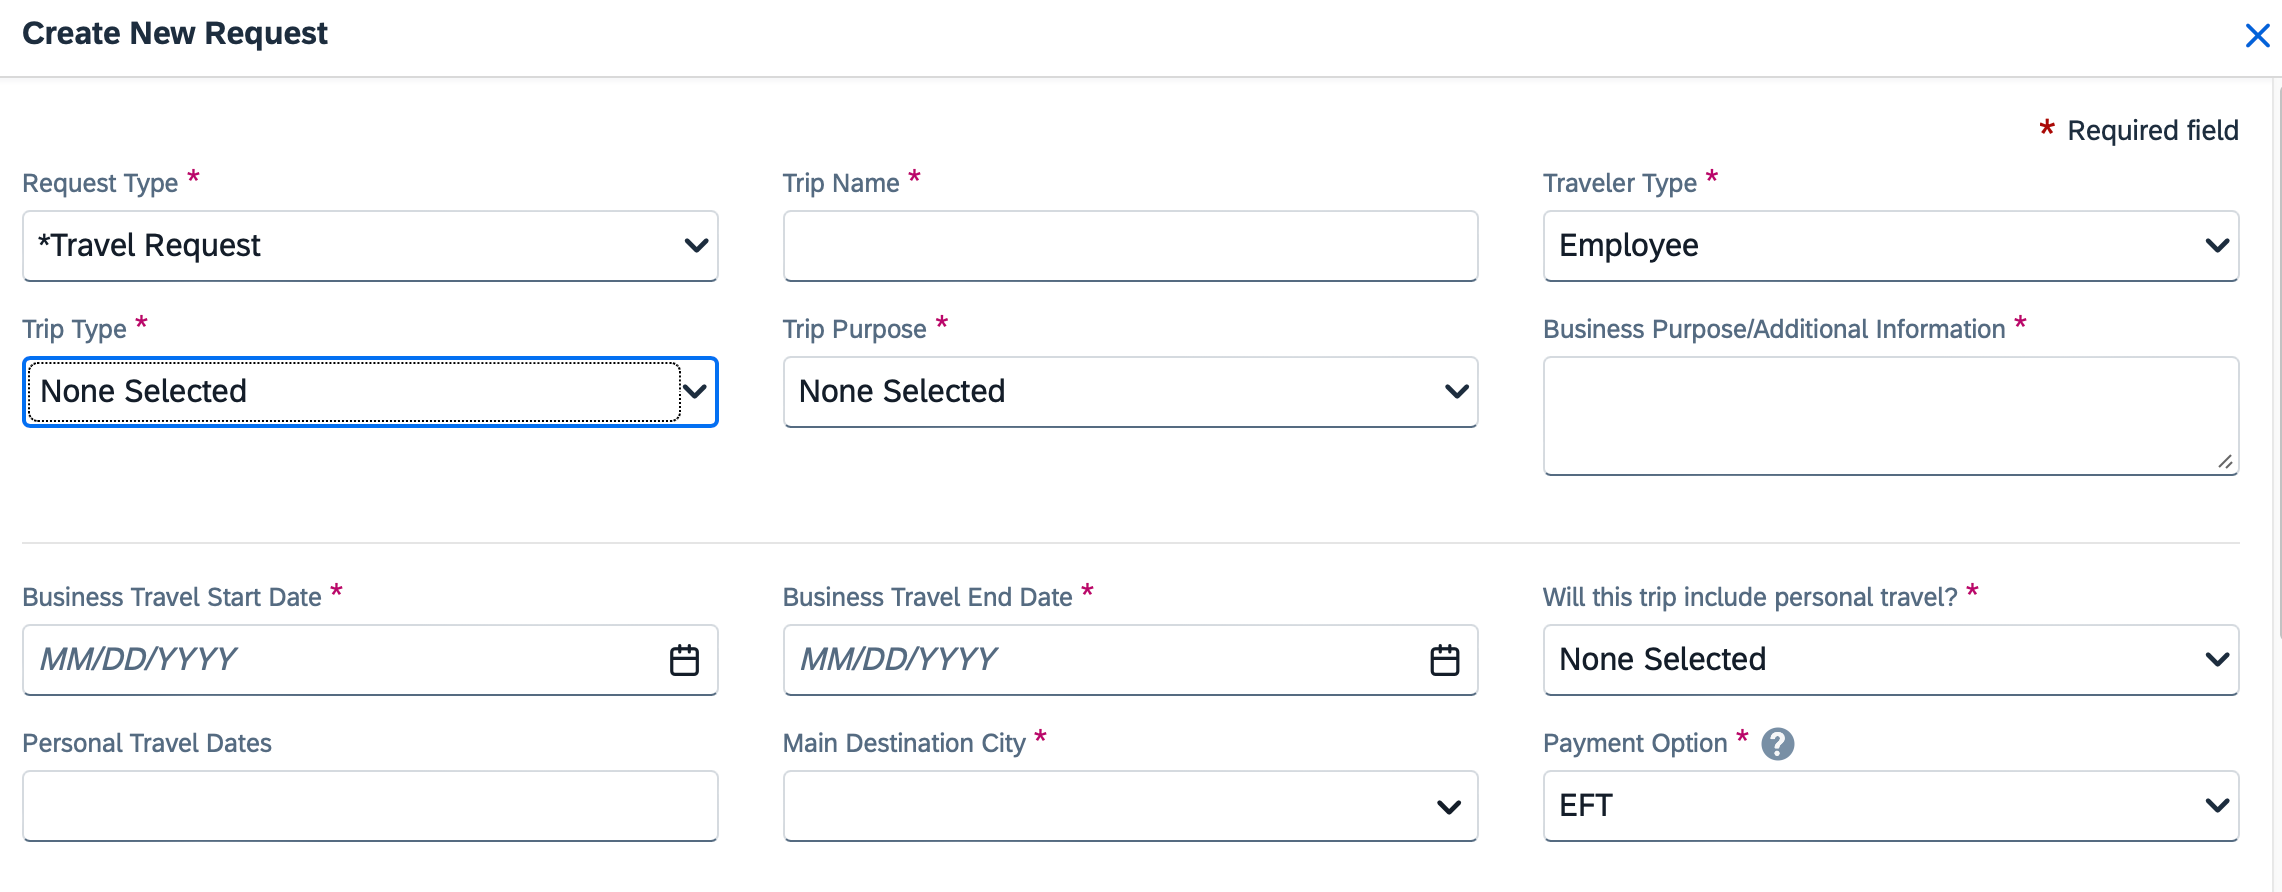 Create new travel request